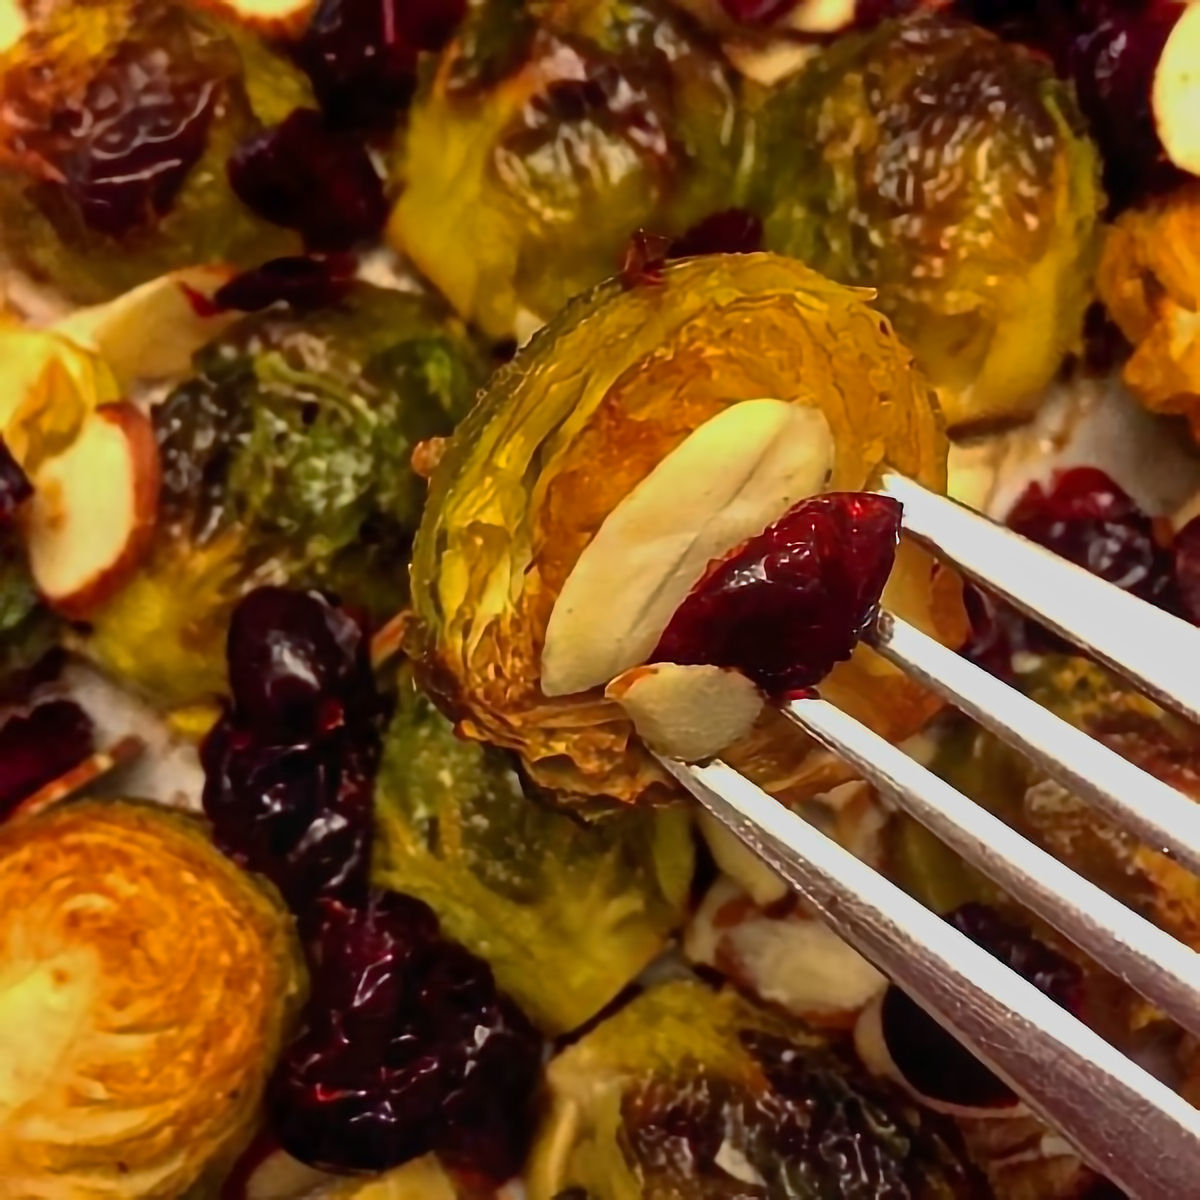 26. Balsamic Roasted Brussels Sprouts With Cranberries And Almonds